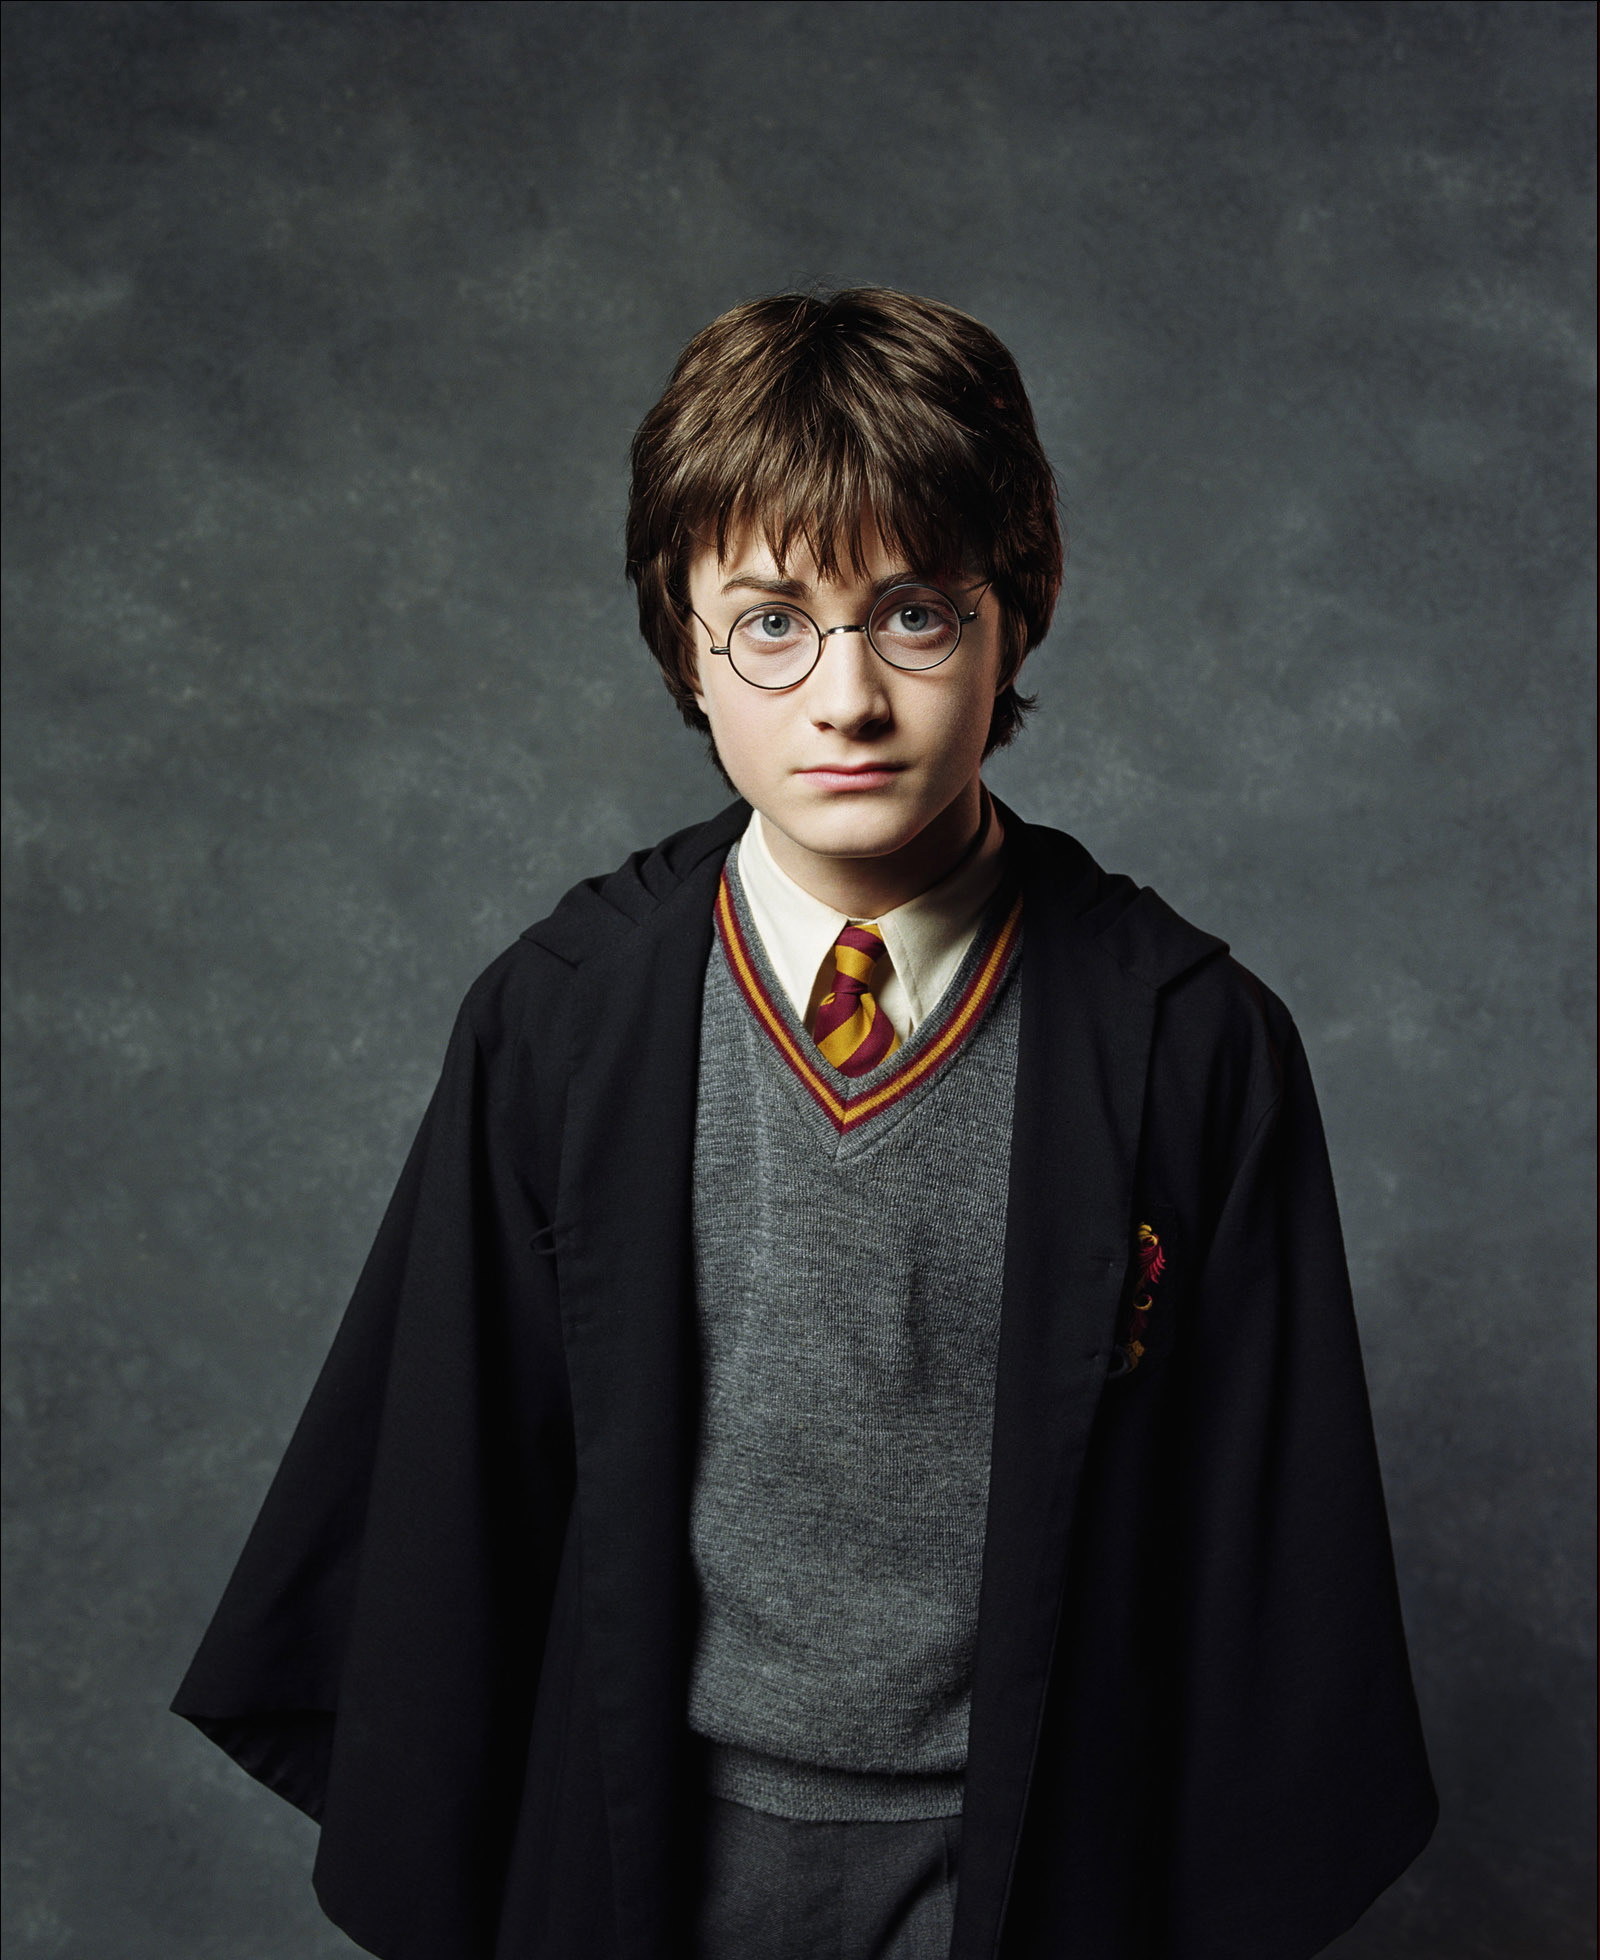 Harry Potter and the Philosopher’s Stone  literaryleaders